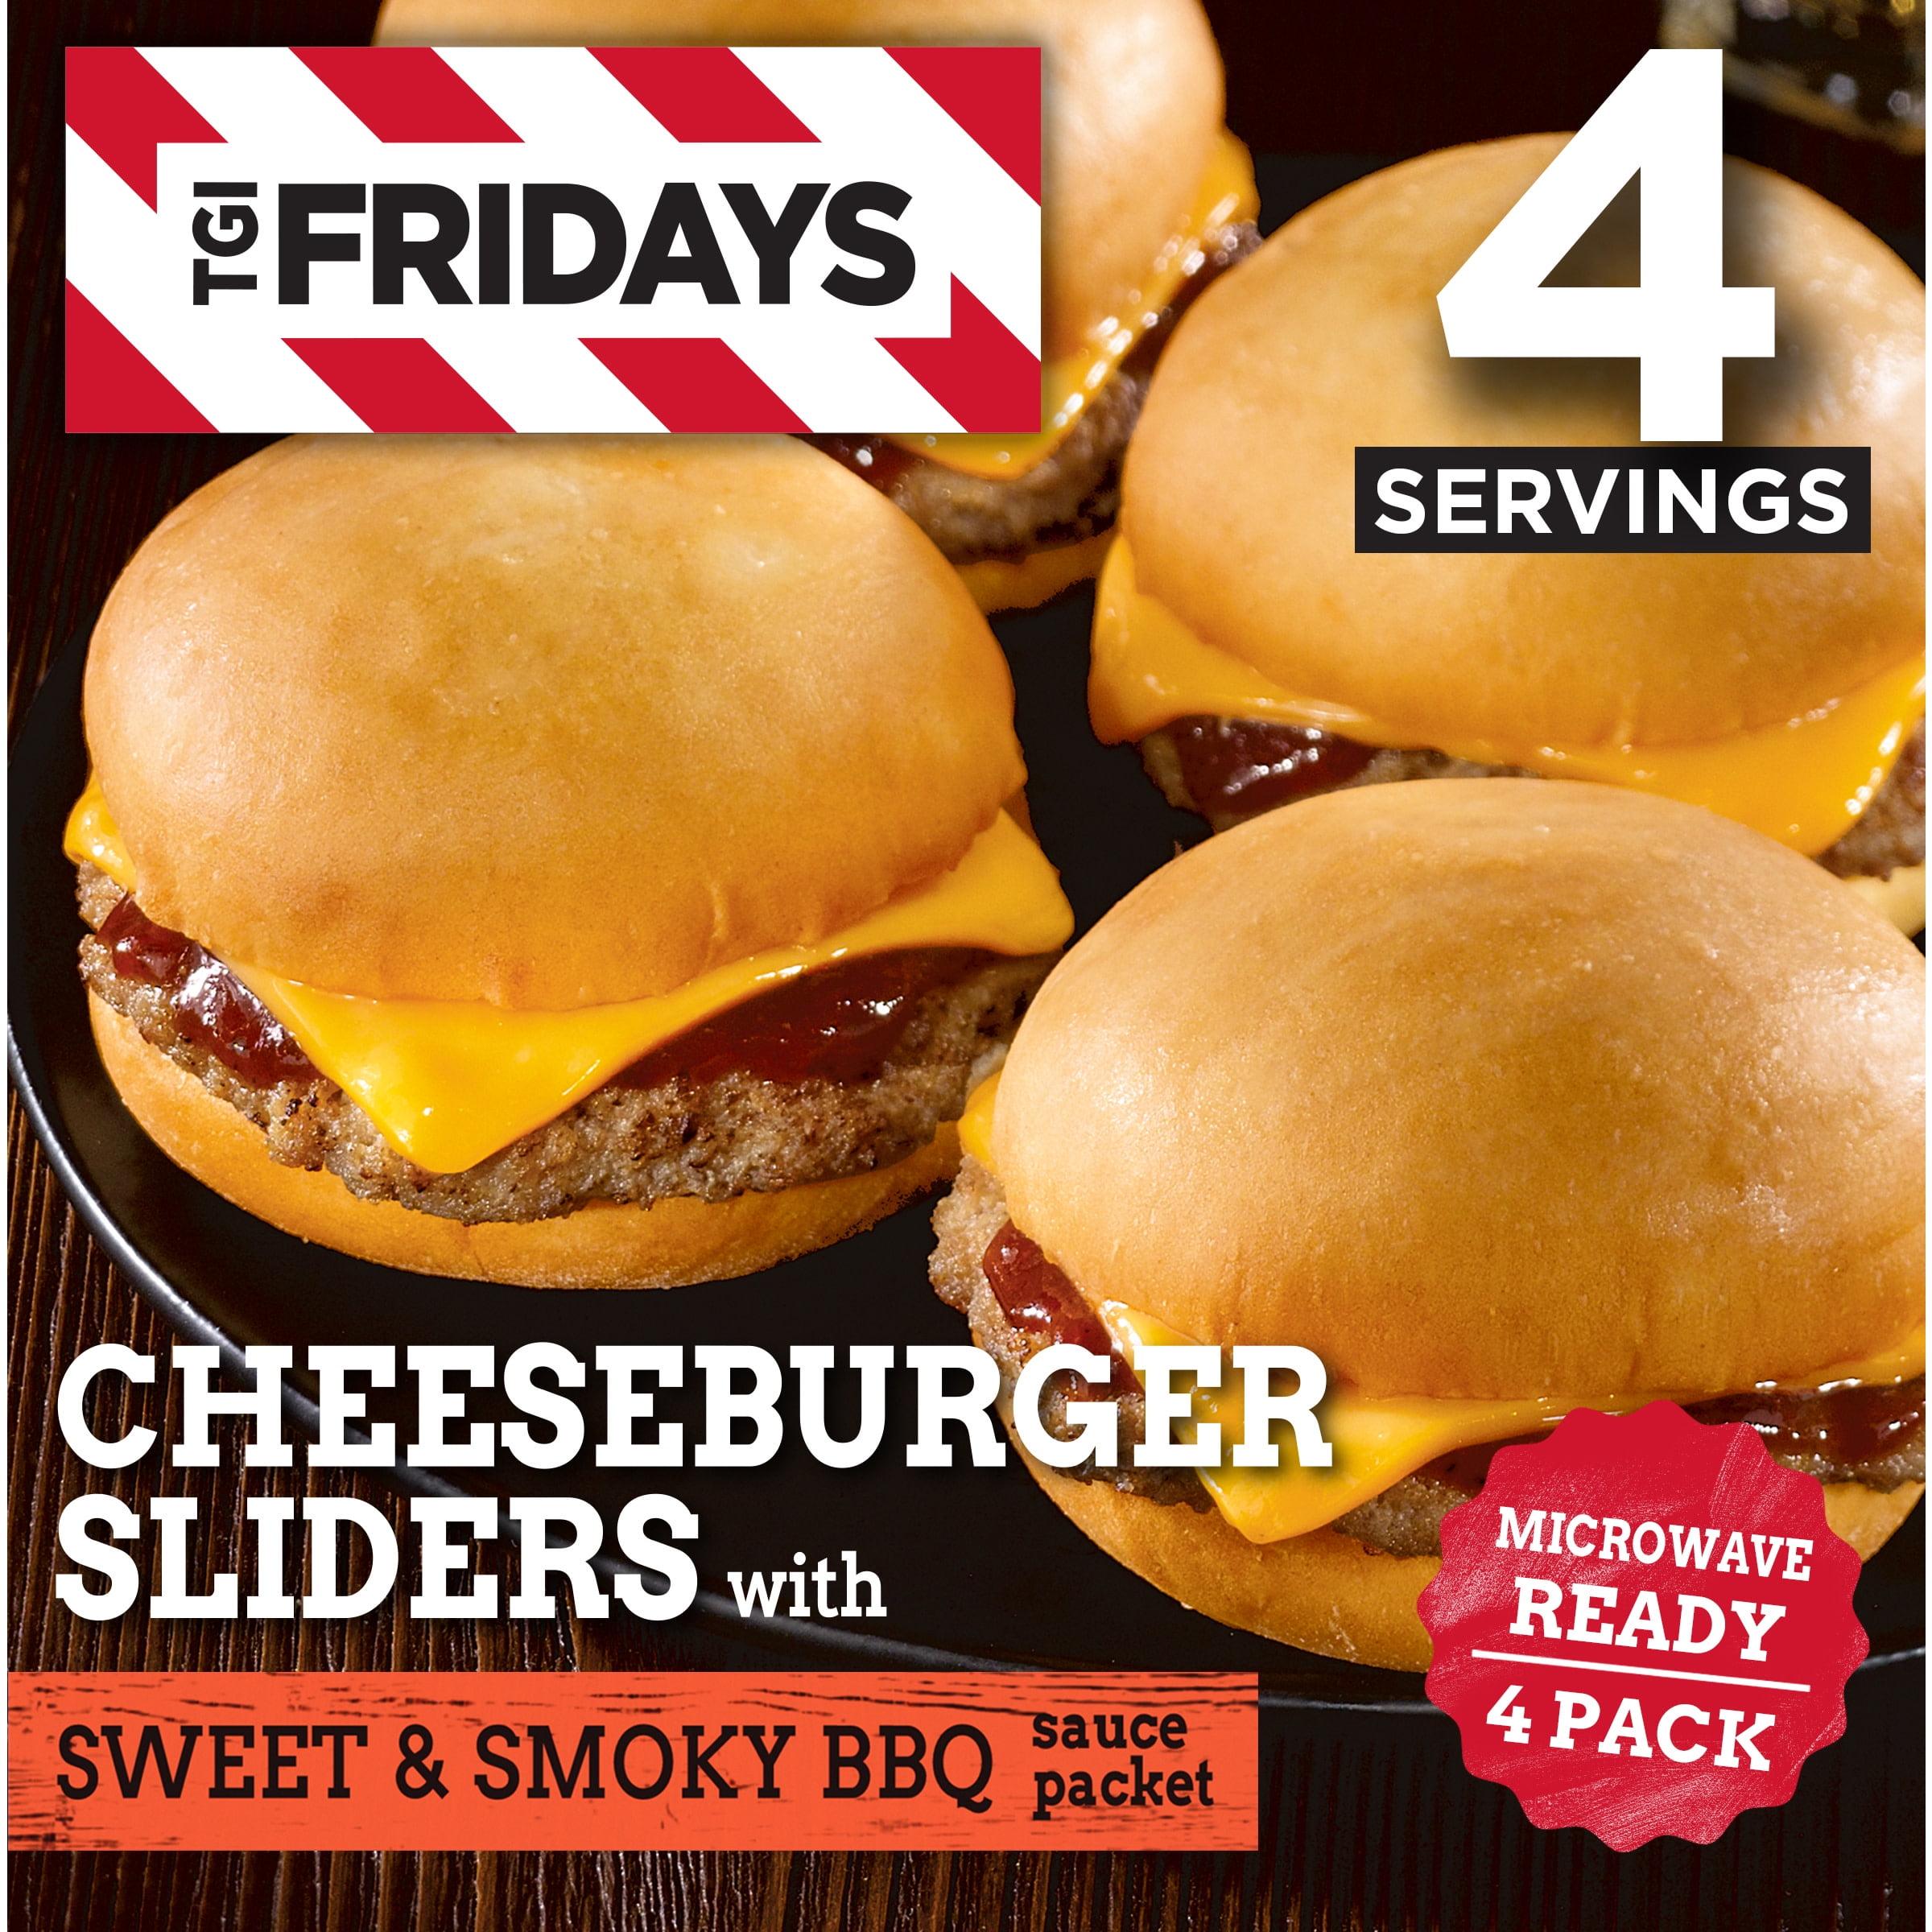 TGI Fridays Frozen Appetizers Cheeseburger Sliders with Sweet & Smoky BBQ Sauce, 4 ct. Box